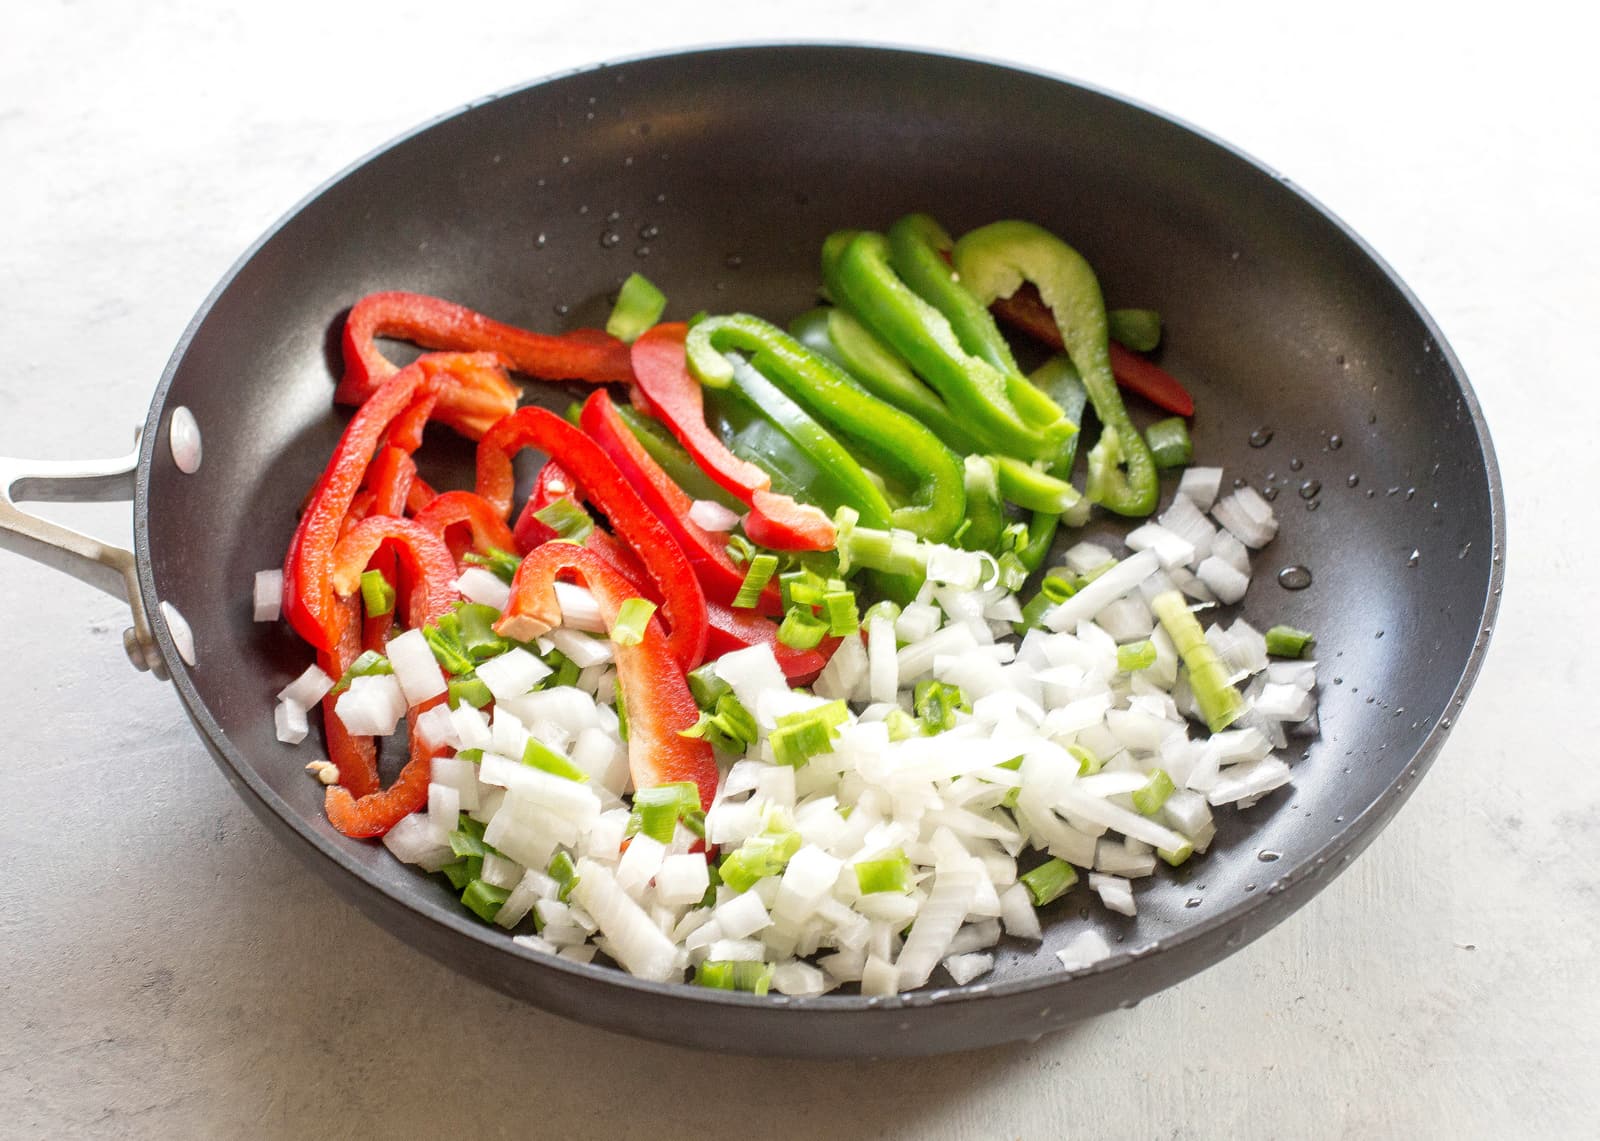 Classic Chicken Fajitas - full of flavor, easy, and just what you want when you're craving fajitas. the-girl-who-ate-everything.com